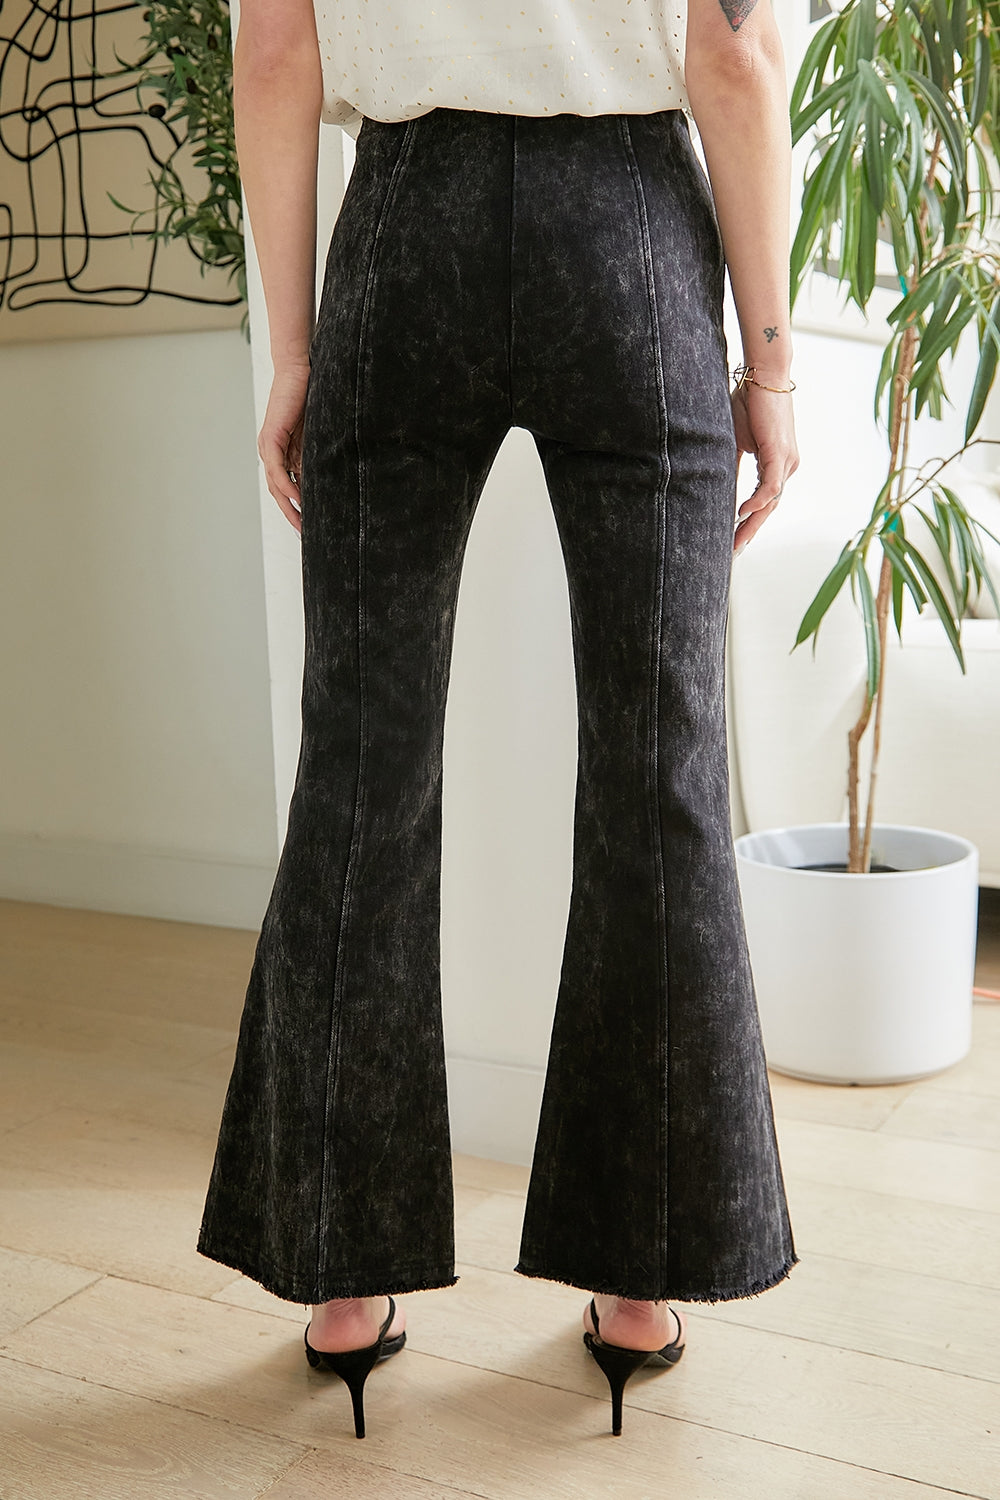 Angelica High Waist Crop Flare Jeans by Mystree: Elevate your style with these mineral-washed high waist pants featuring a chic flare hem and eye-catching fringe detail. The side zipper closure ensures a sleek fit, while sophisticated middle seams add modern flair. Explore our collection for trendy bottoms that seamlessly blend comfort and style.